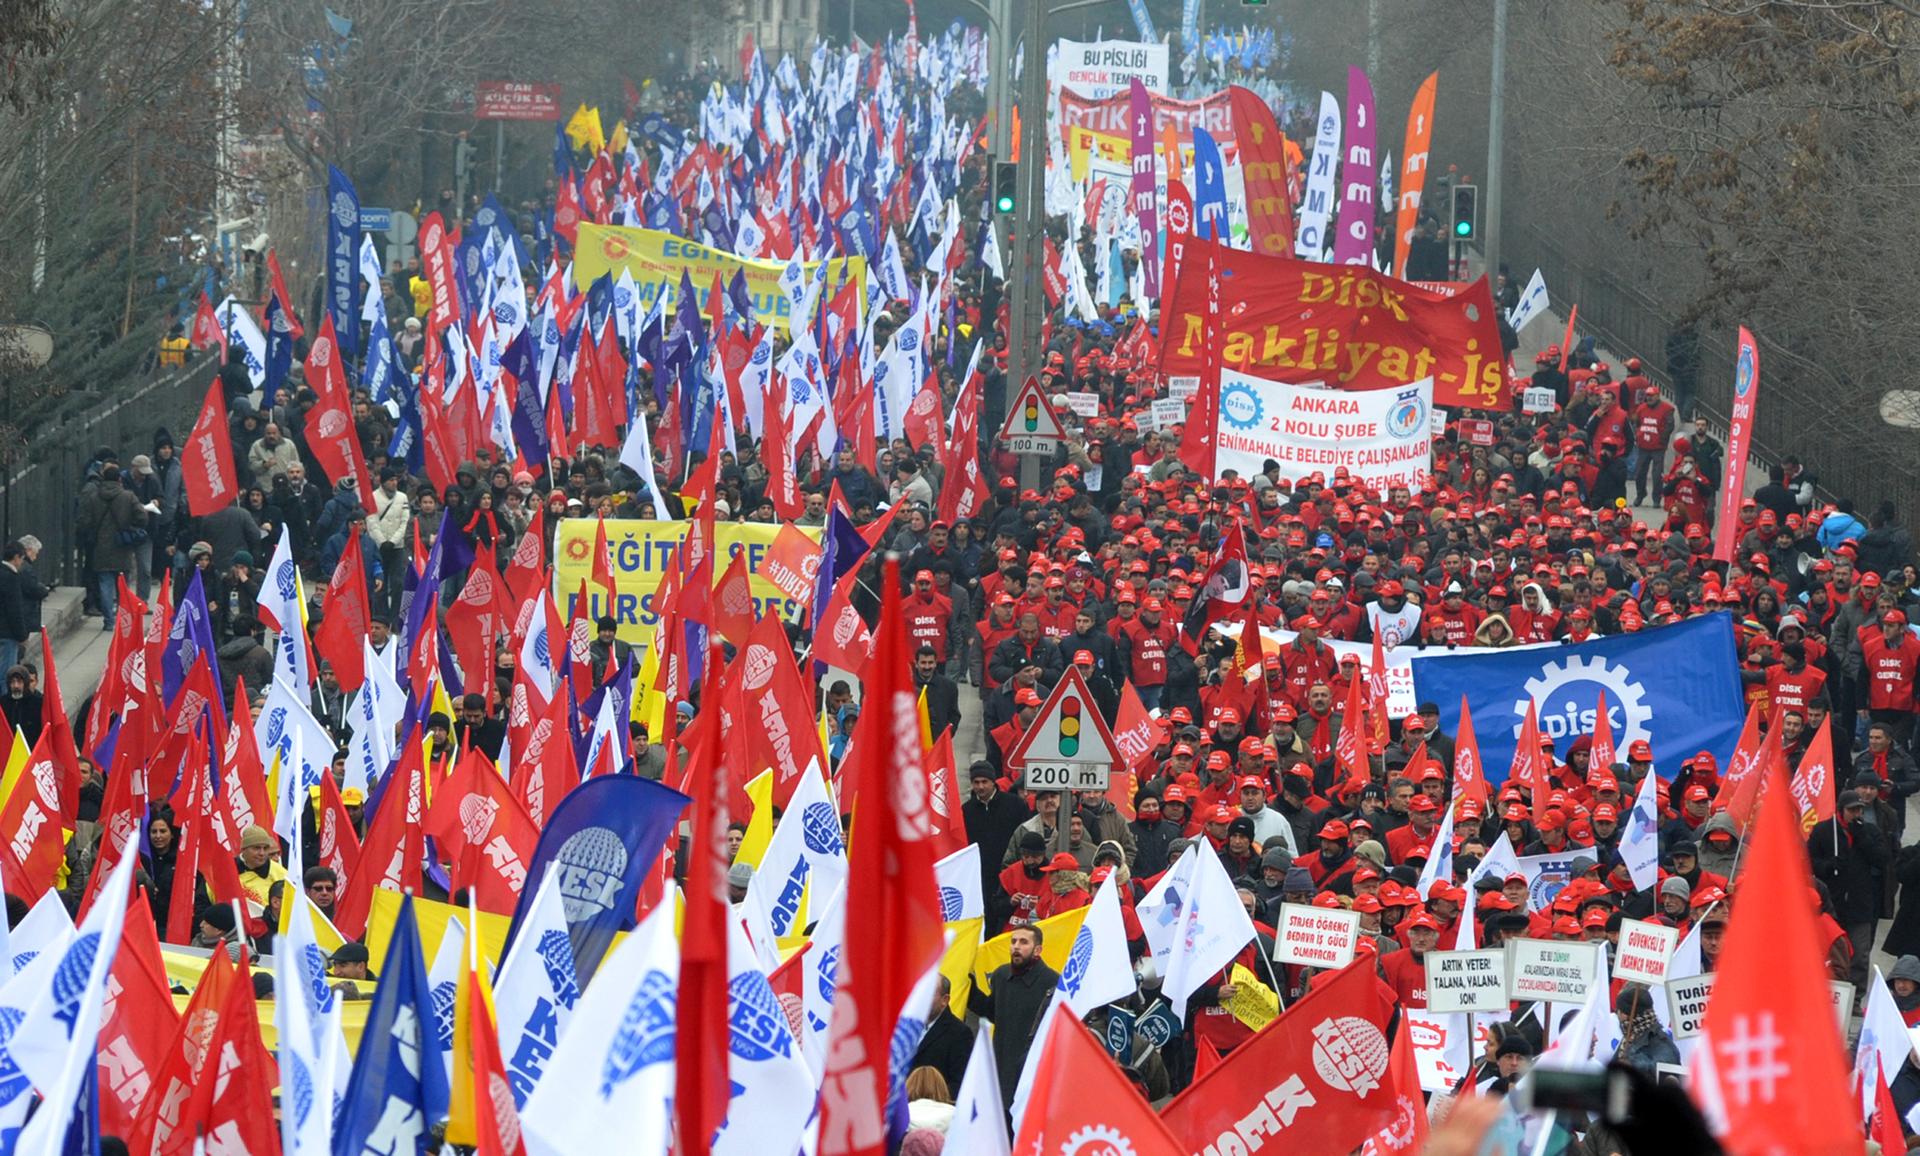 Thousands march in protest against Turkey's ruling AK Party (AKP) over a corruption probe. 